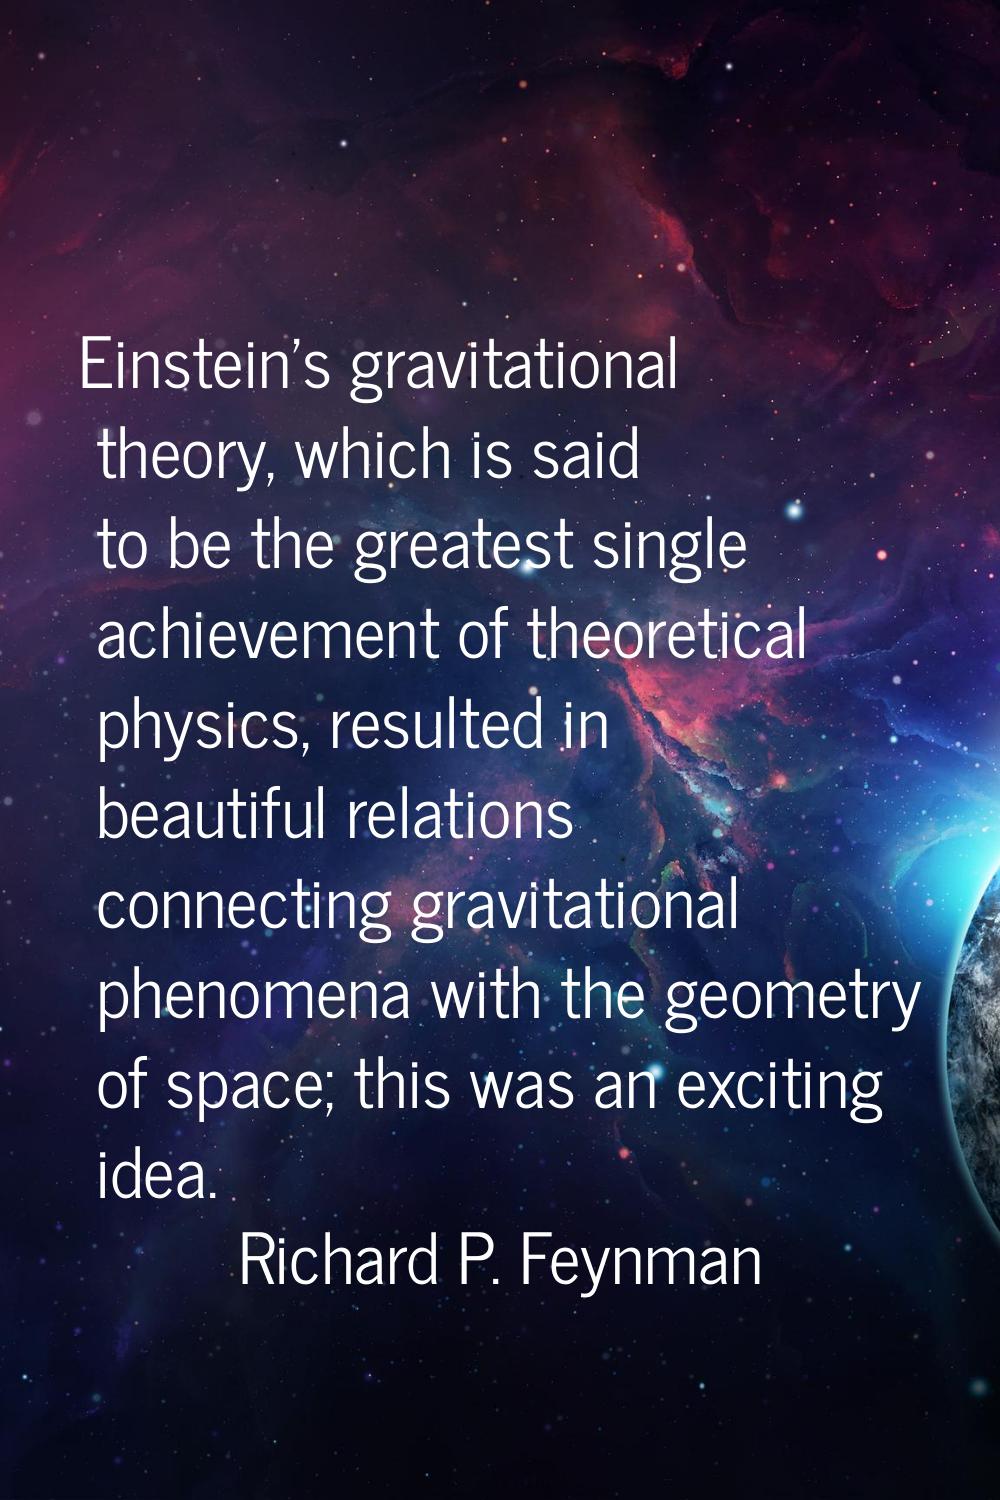 Einstein's gravitational theory, which is said to be the greatest single achievement of theoretical